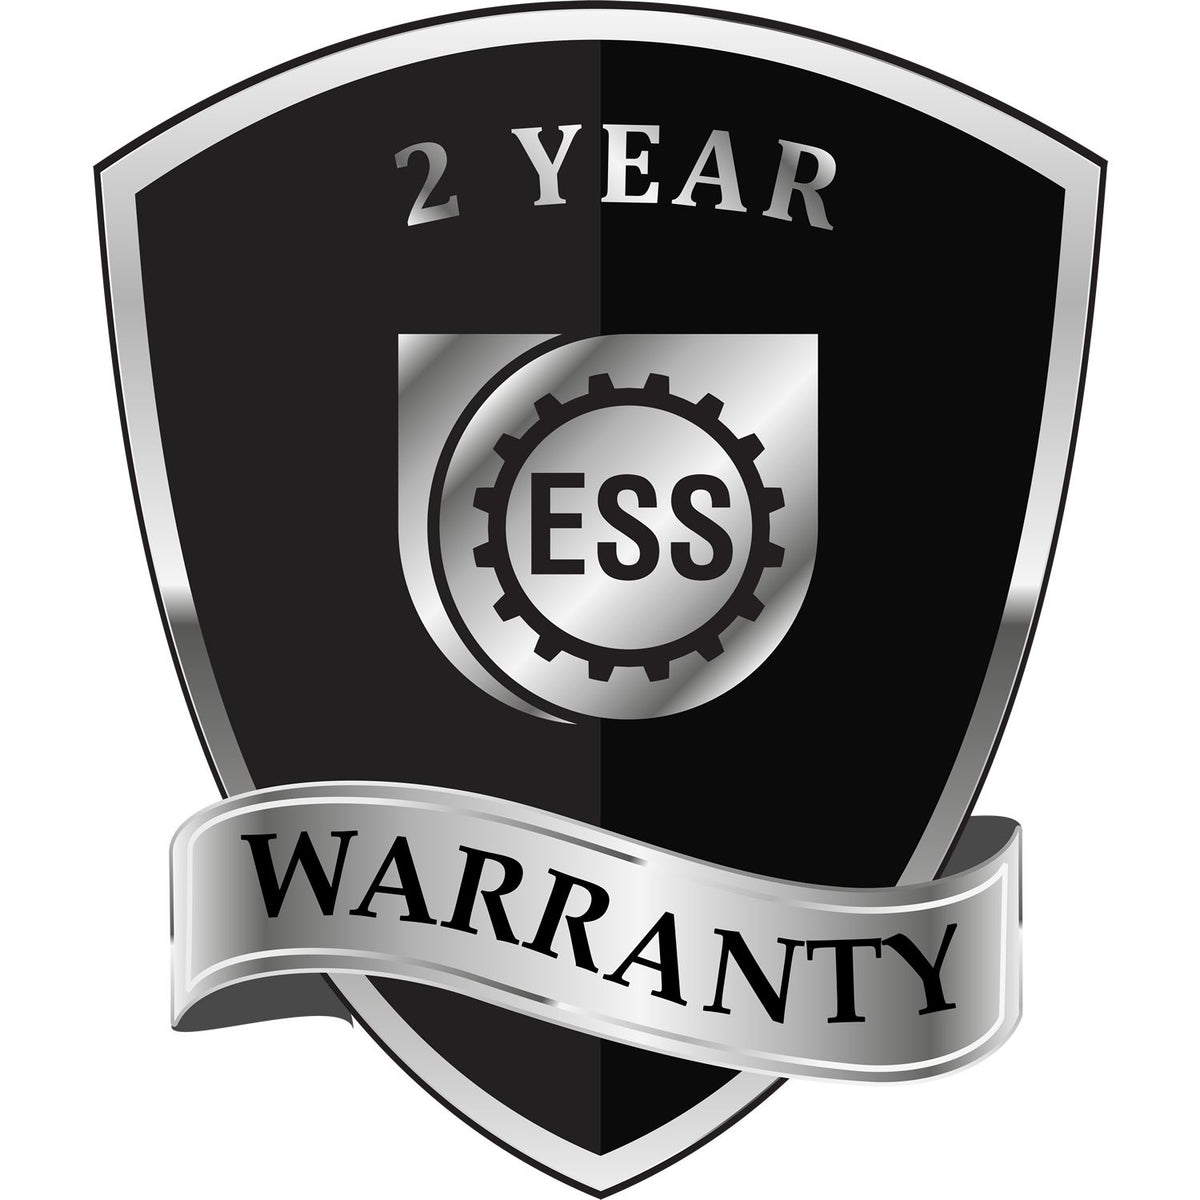 A badge or emblem showing a warranty icon for the Vermont Engineer Desk Seal